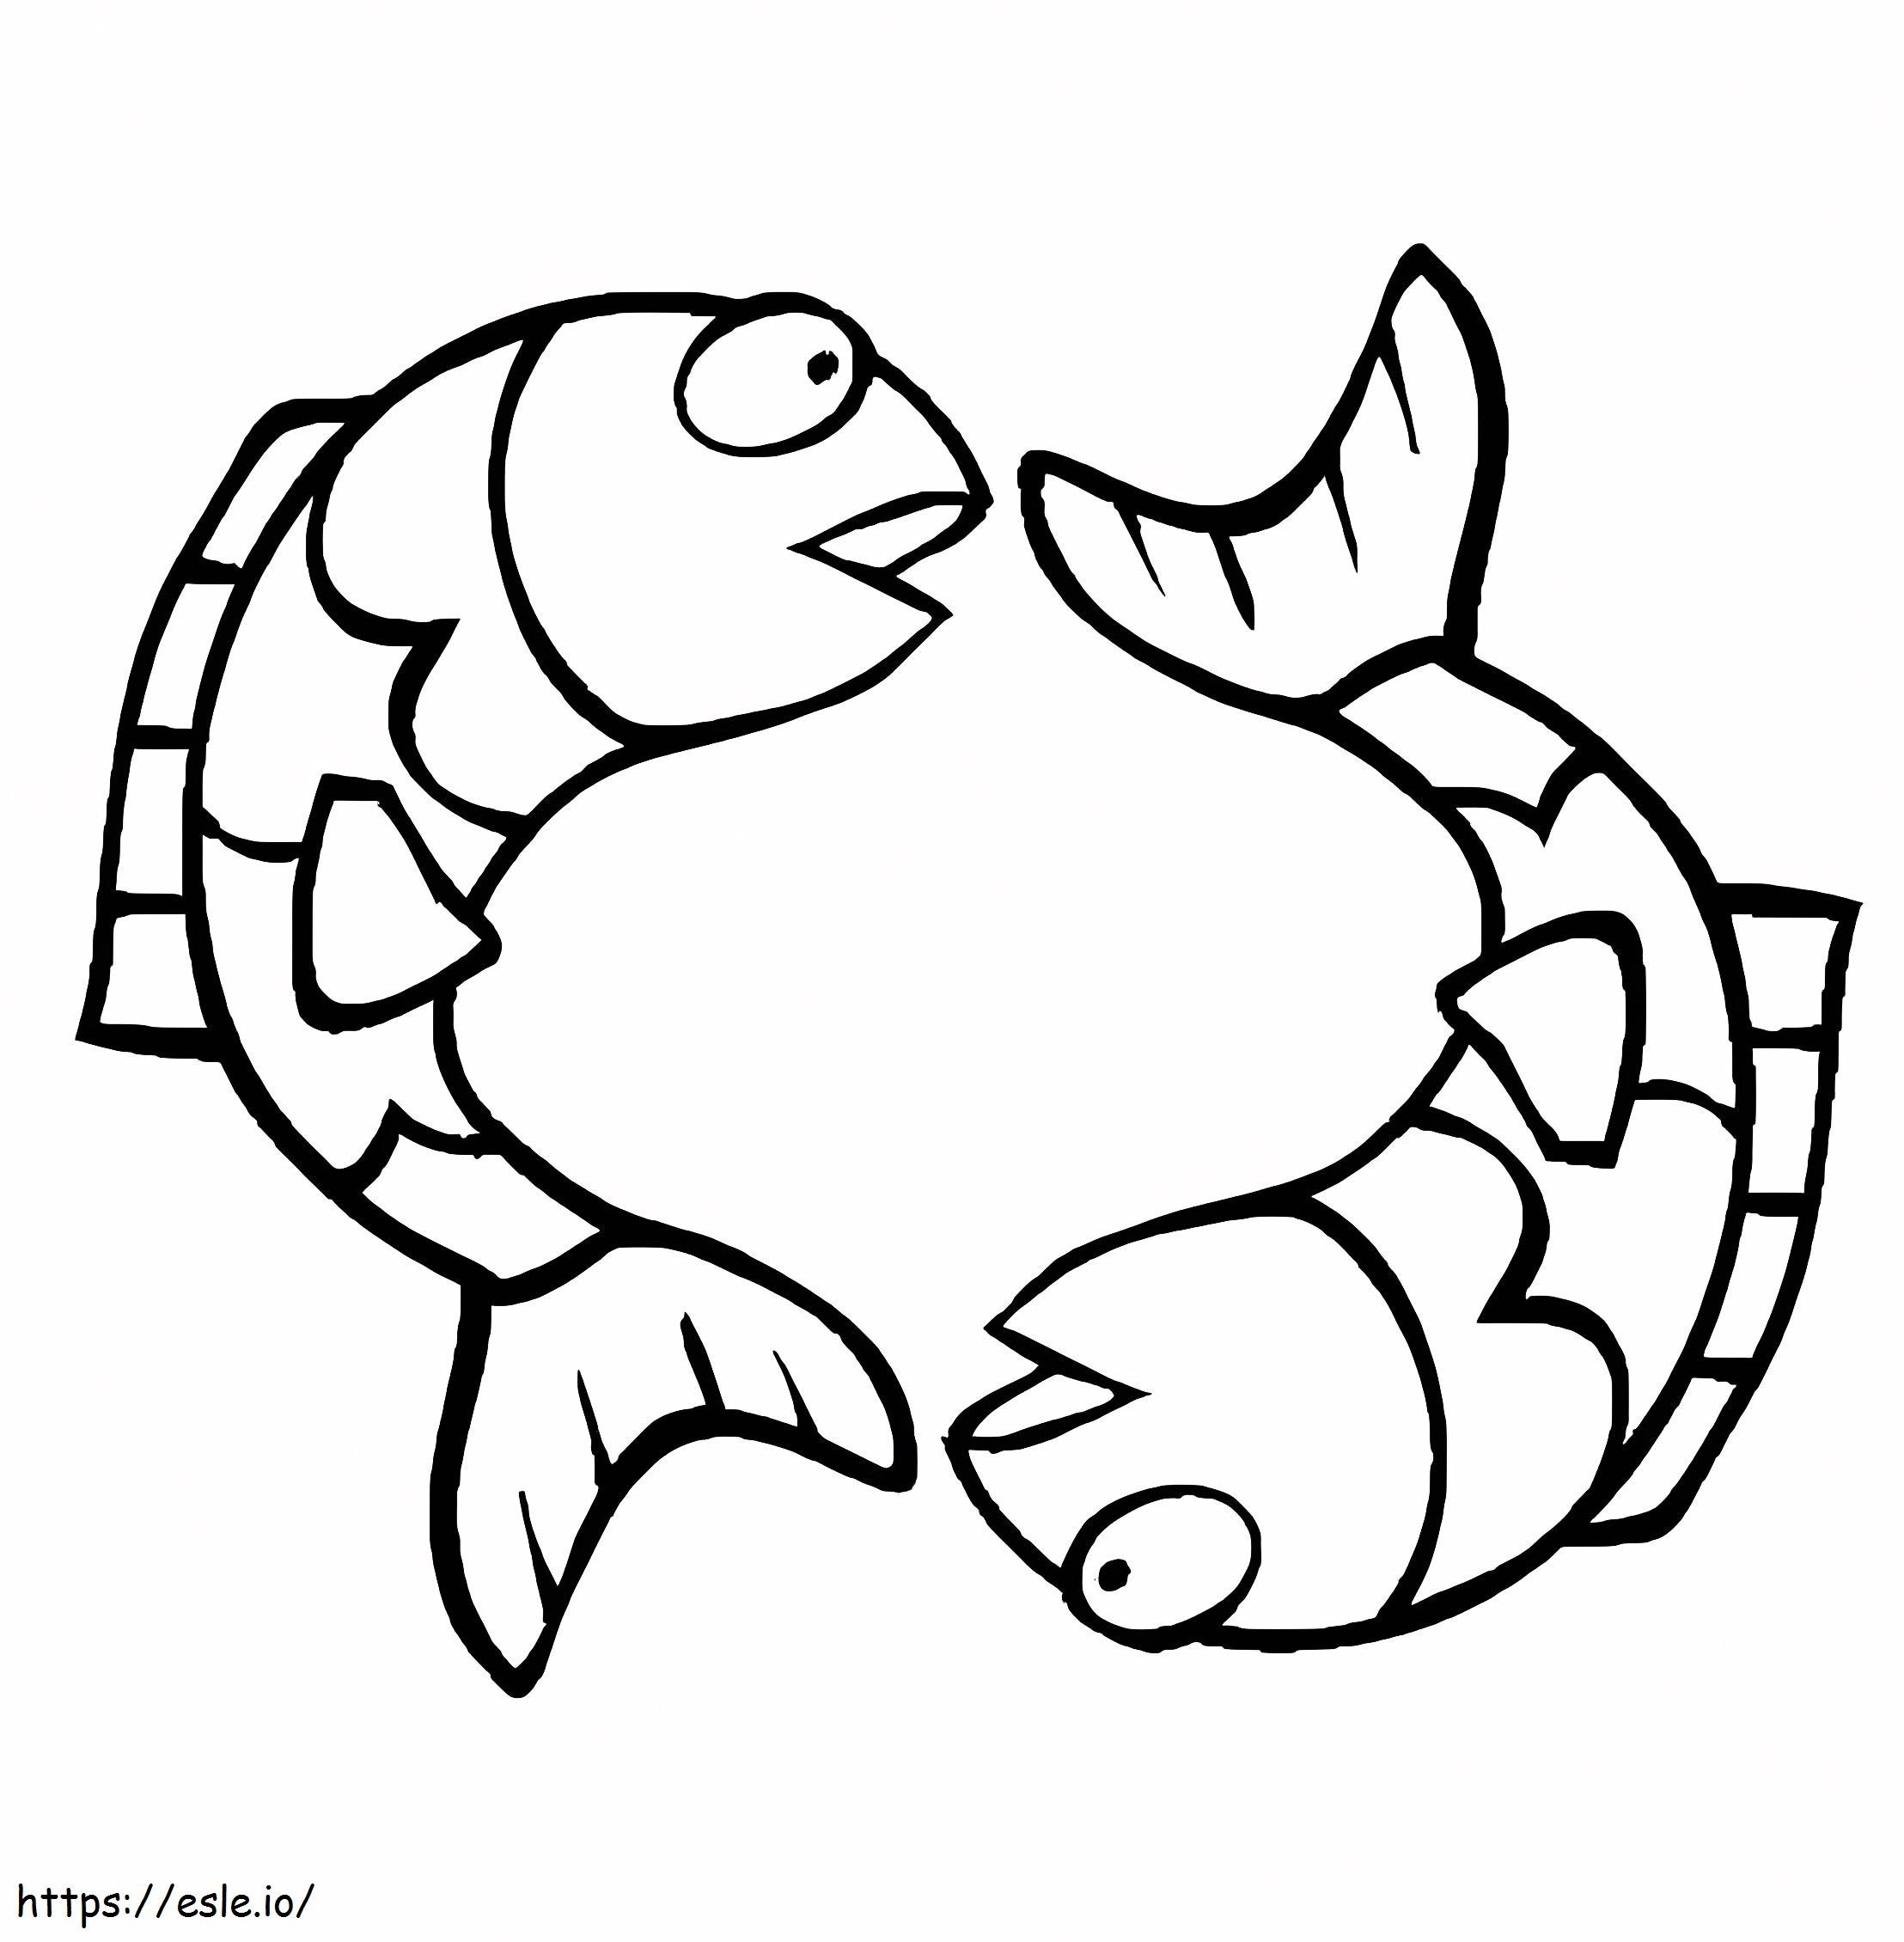 Pisces For Kids coloring page